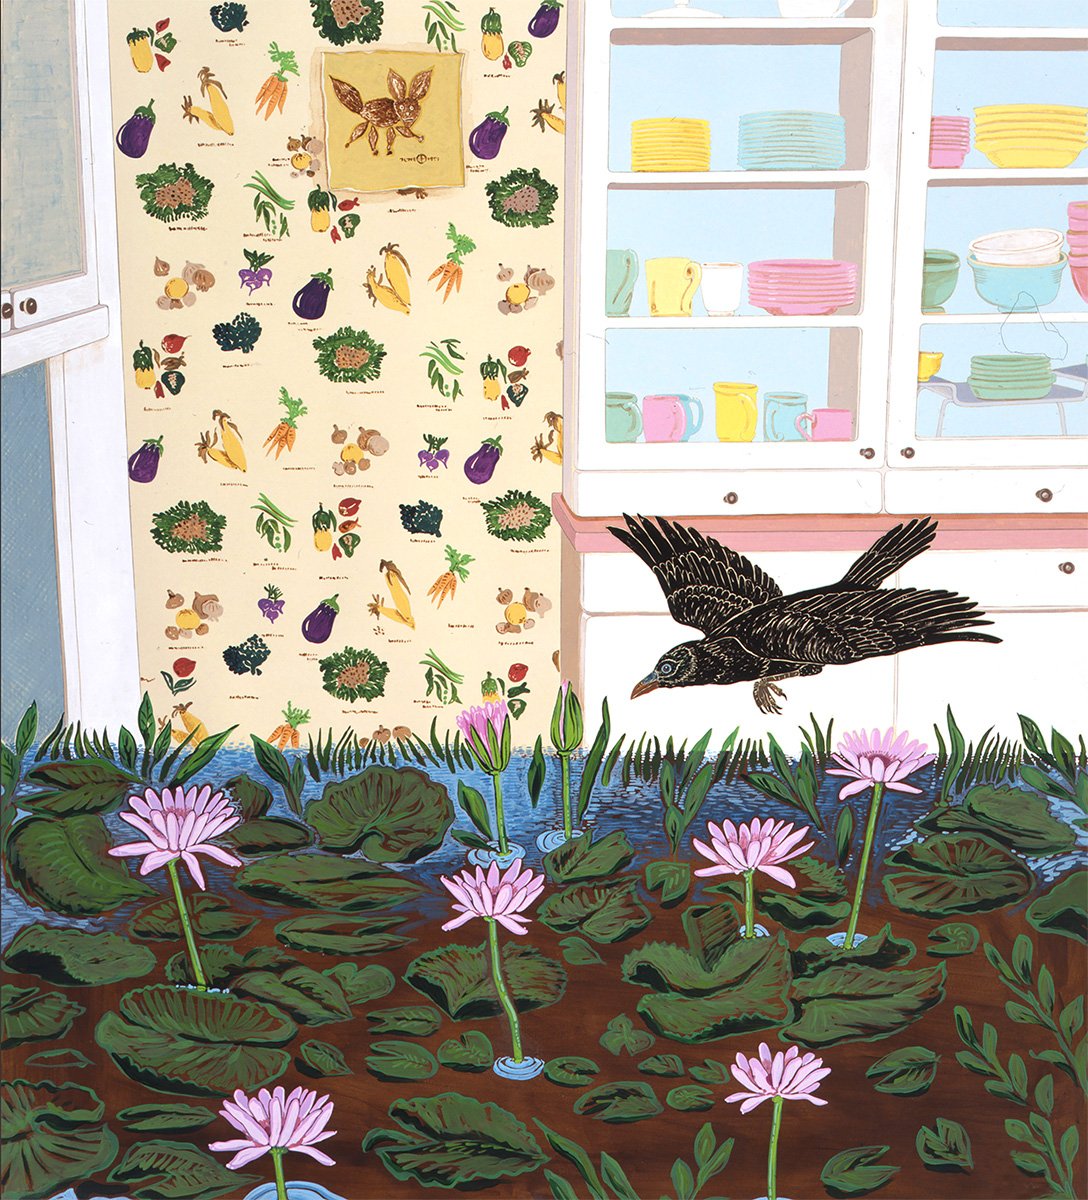 6.  Crow in Kitchen | 50" x 40" | Acrylic on Arches Paper